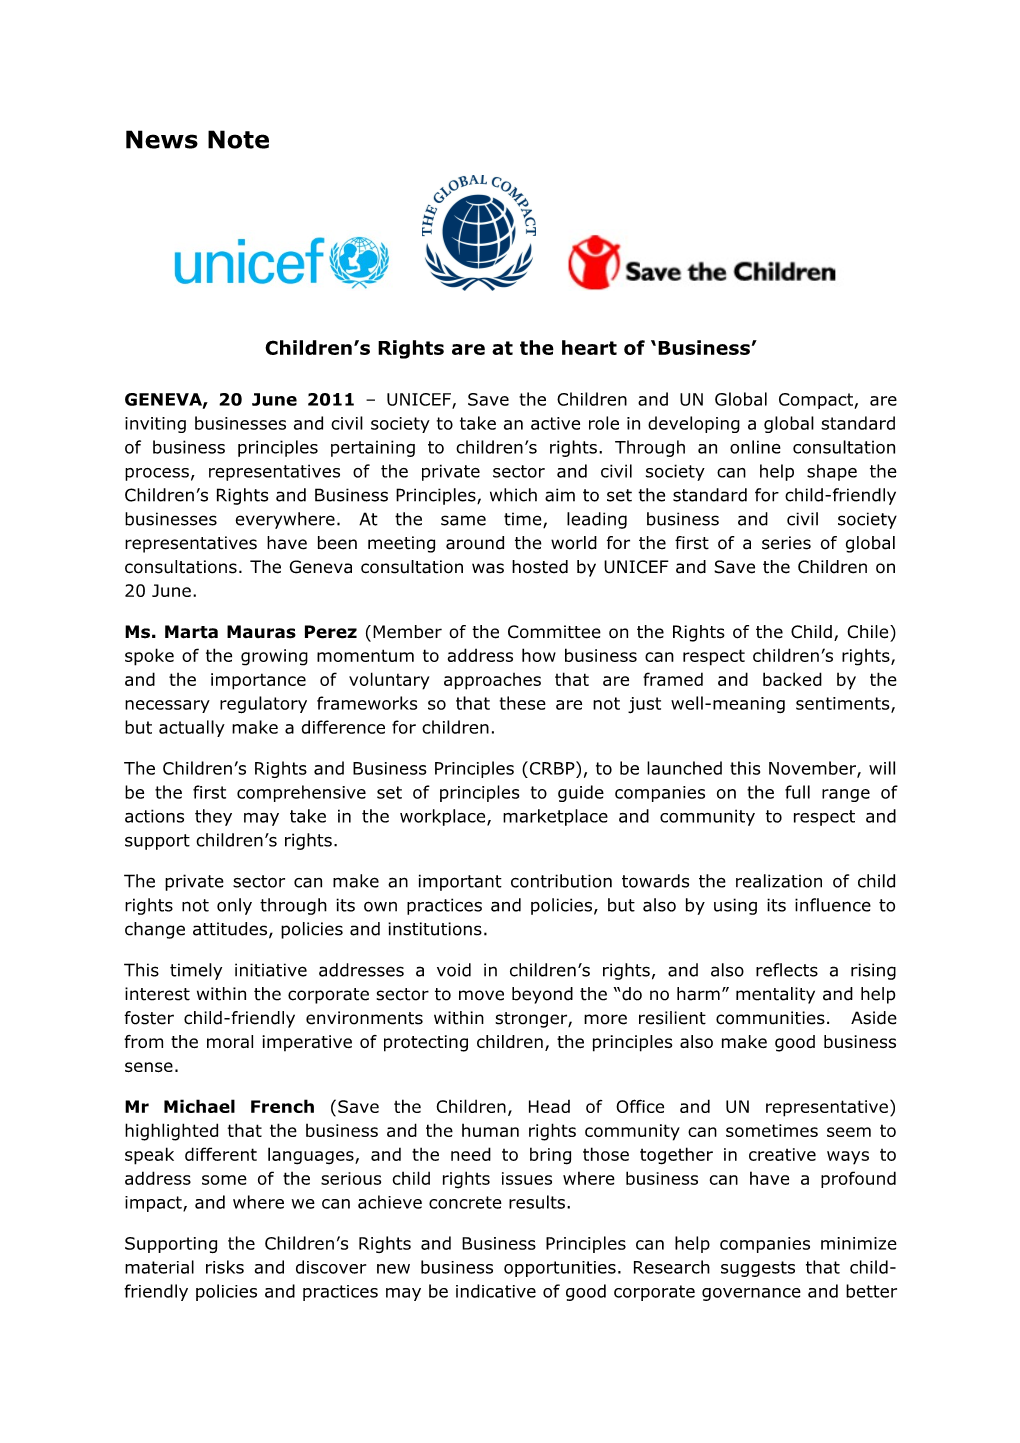 Children S Rights and Business Principles Initiative News Note